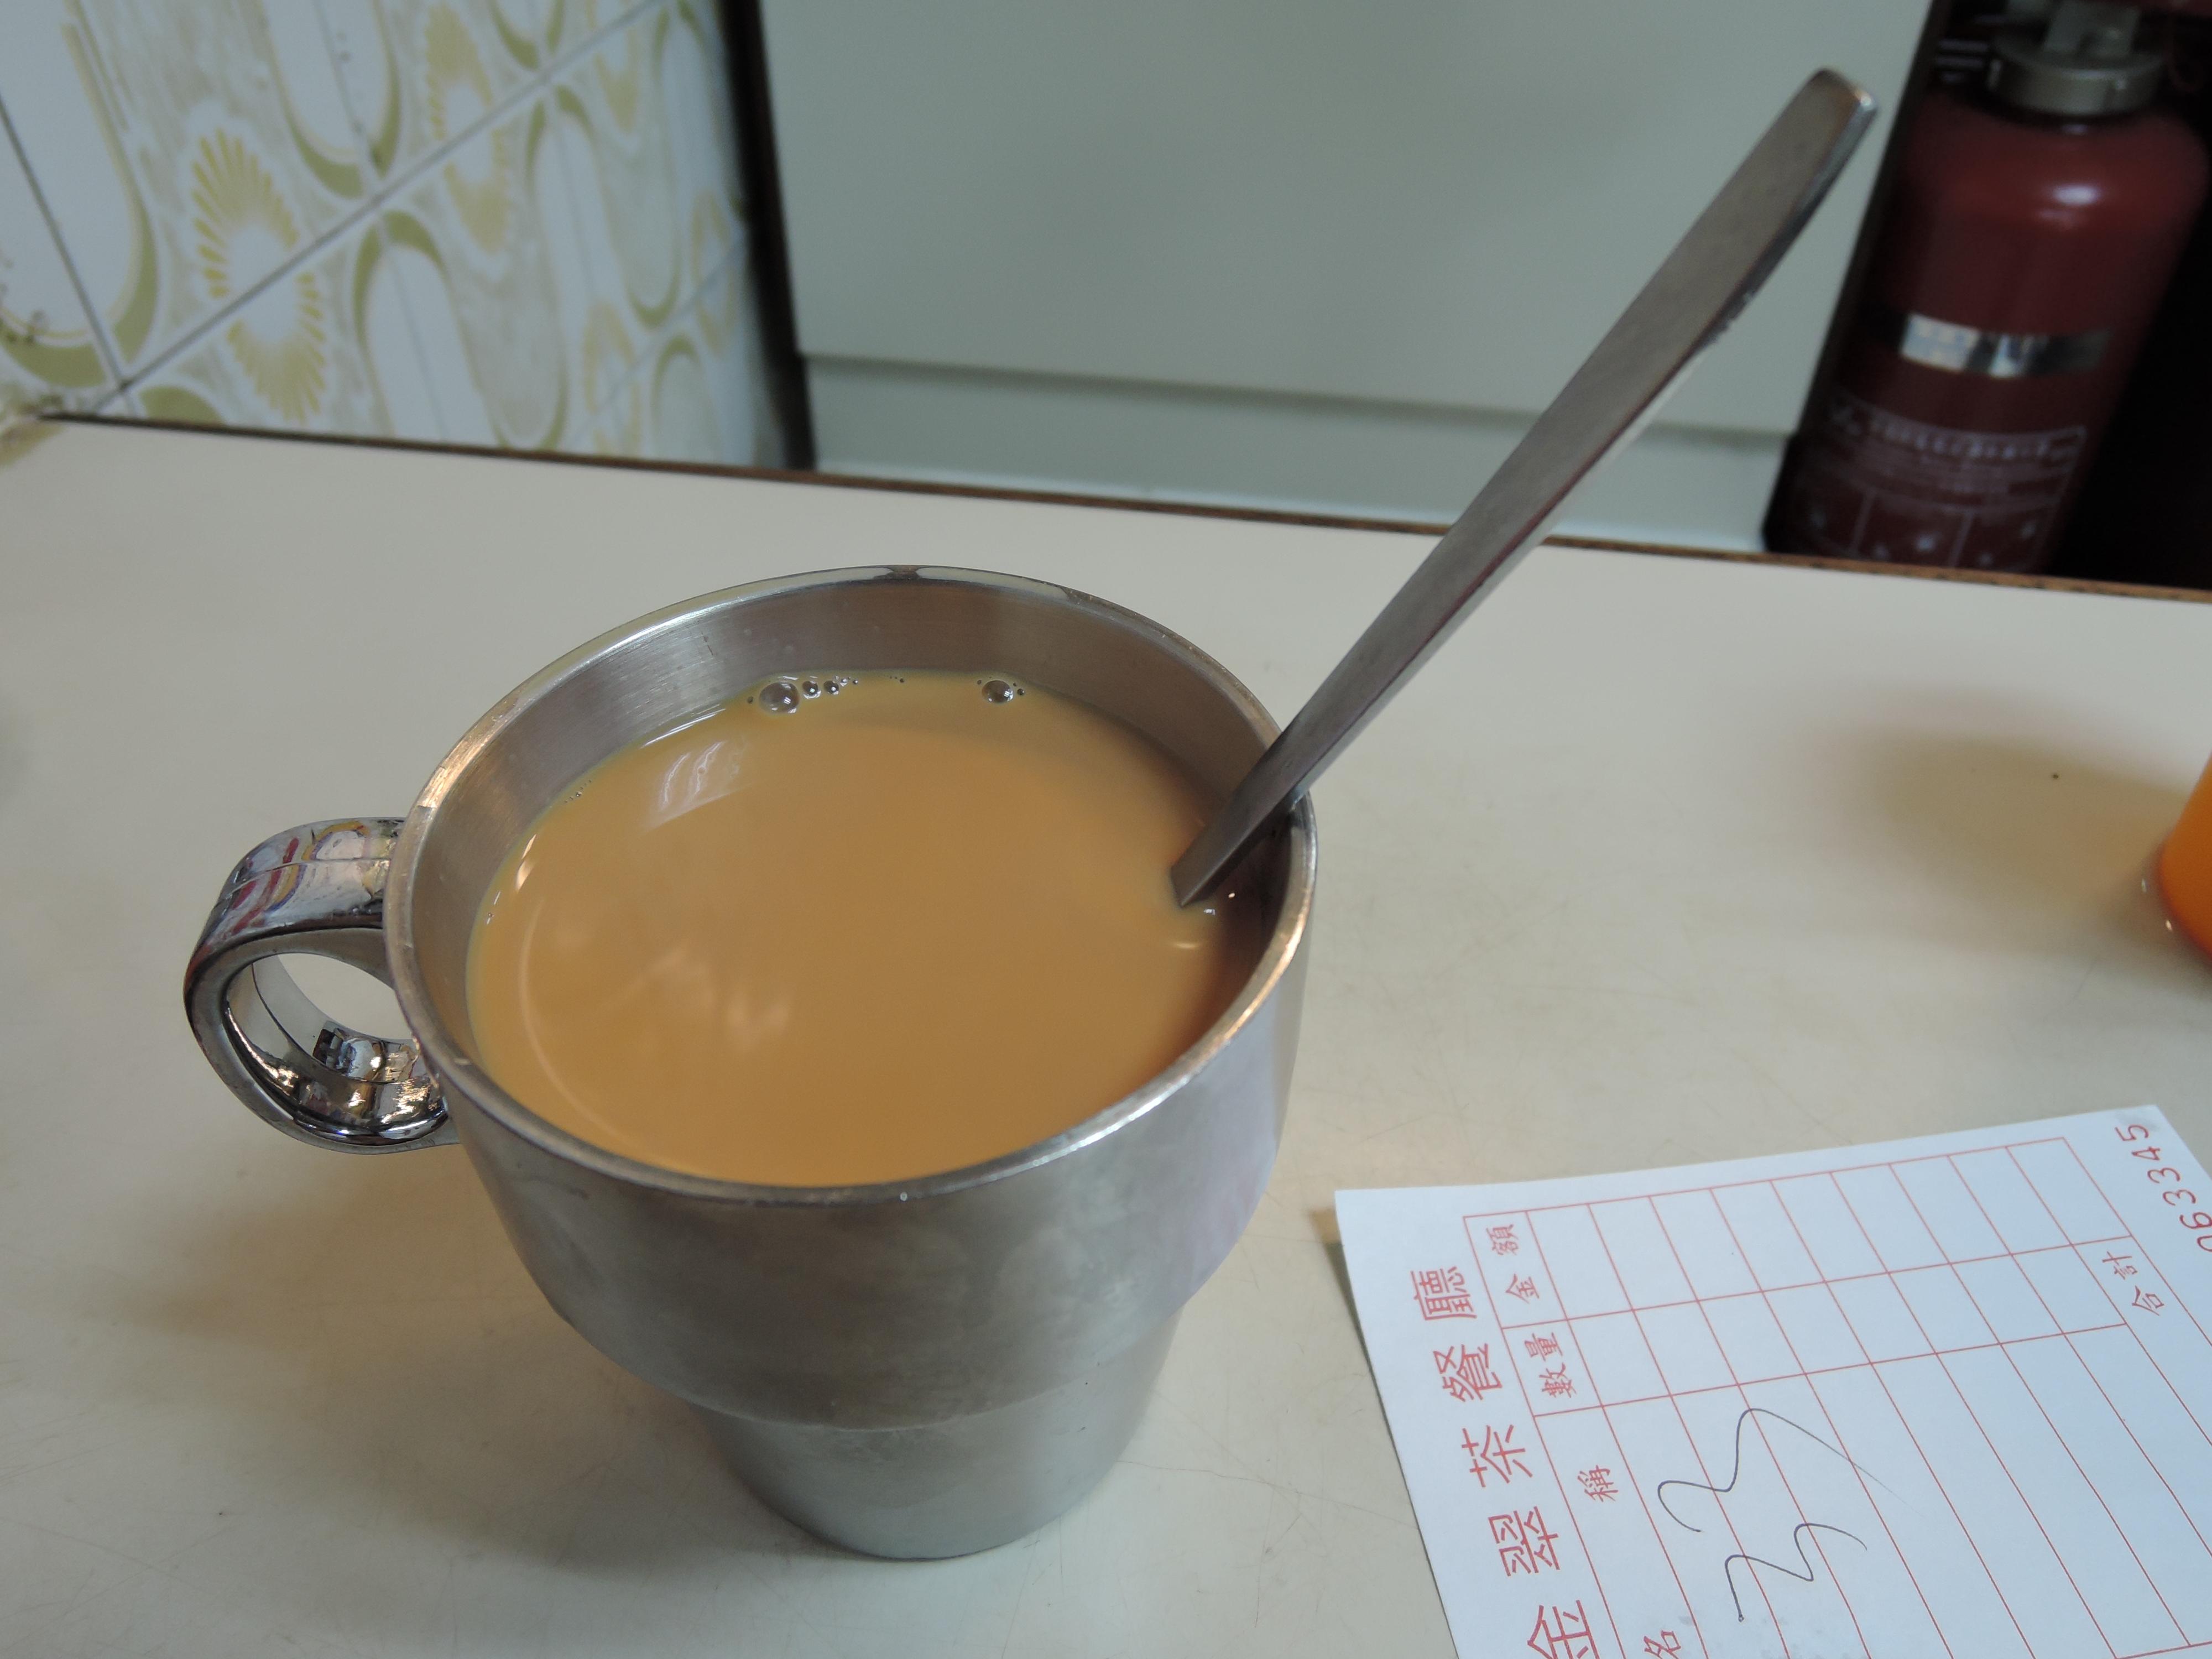 File:Special milk tea with hong kong style.jpg - Wikimedia Commons